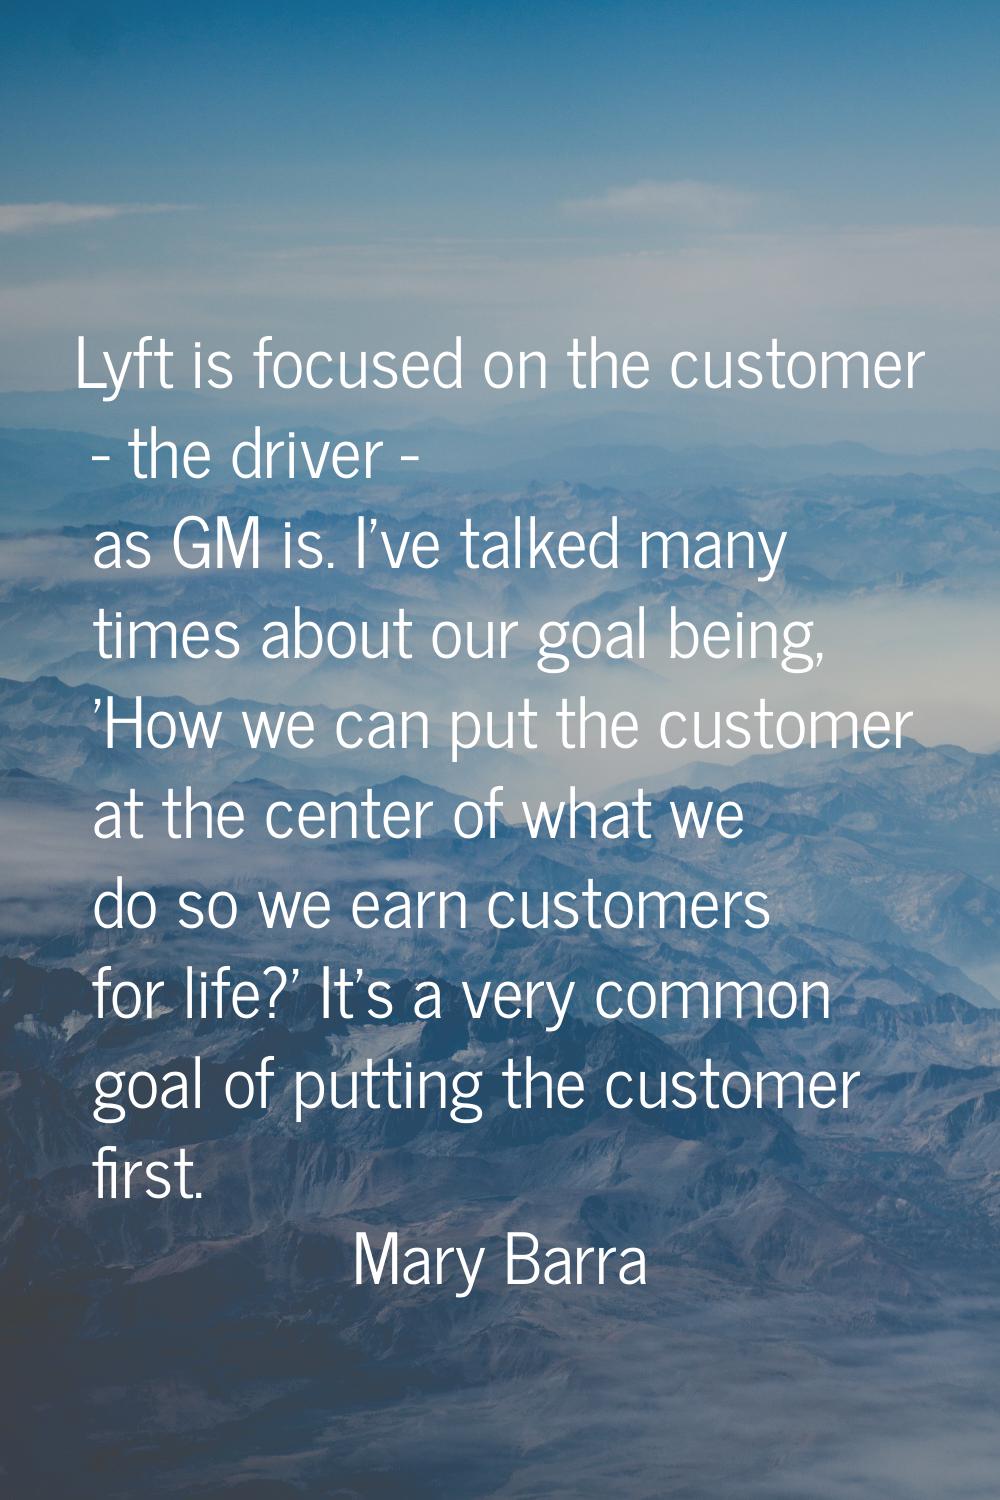 Lyft is focused on the customer - the driver - as GM is. I've talked many times about our goal bein